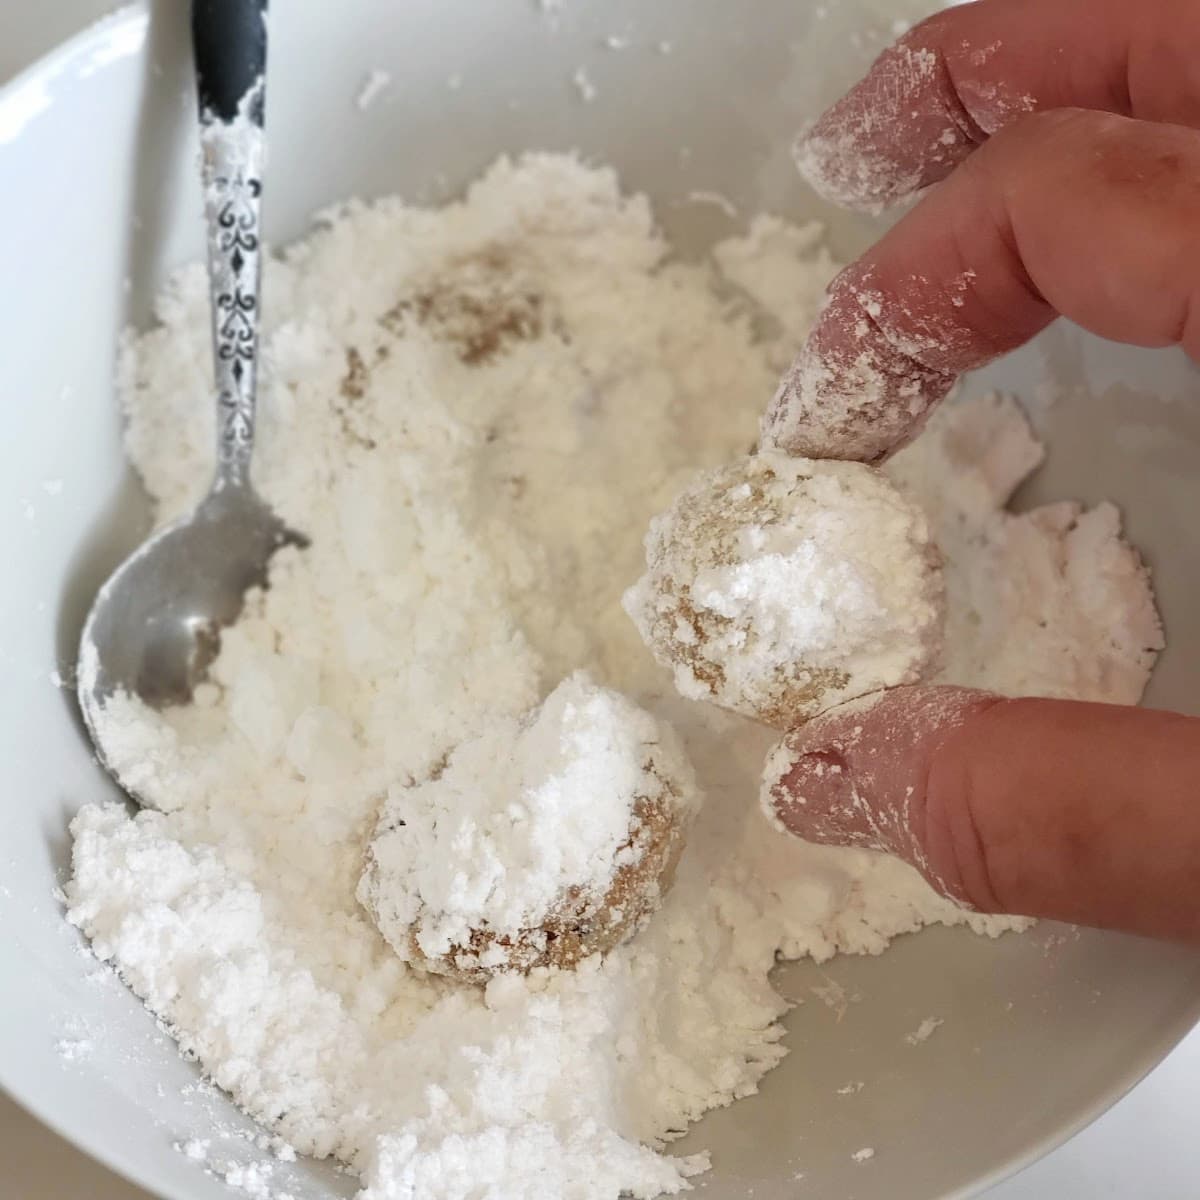 Fingers hold a Mexican Wedding Cookie in a bowl of powdered sugar with other cookies and a spoon also in the bowl